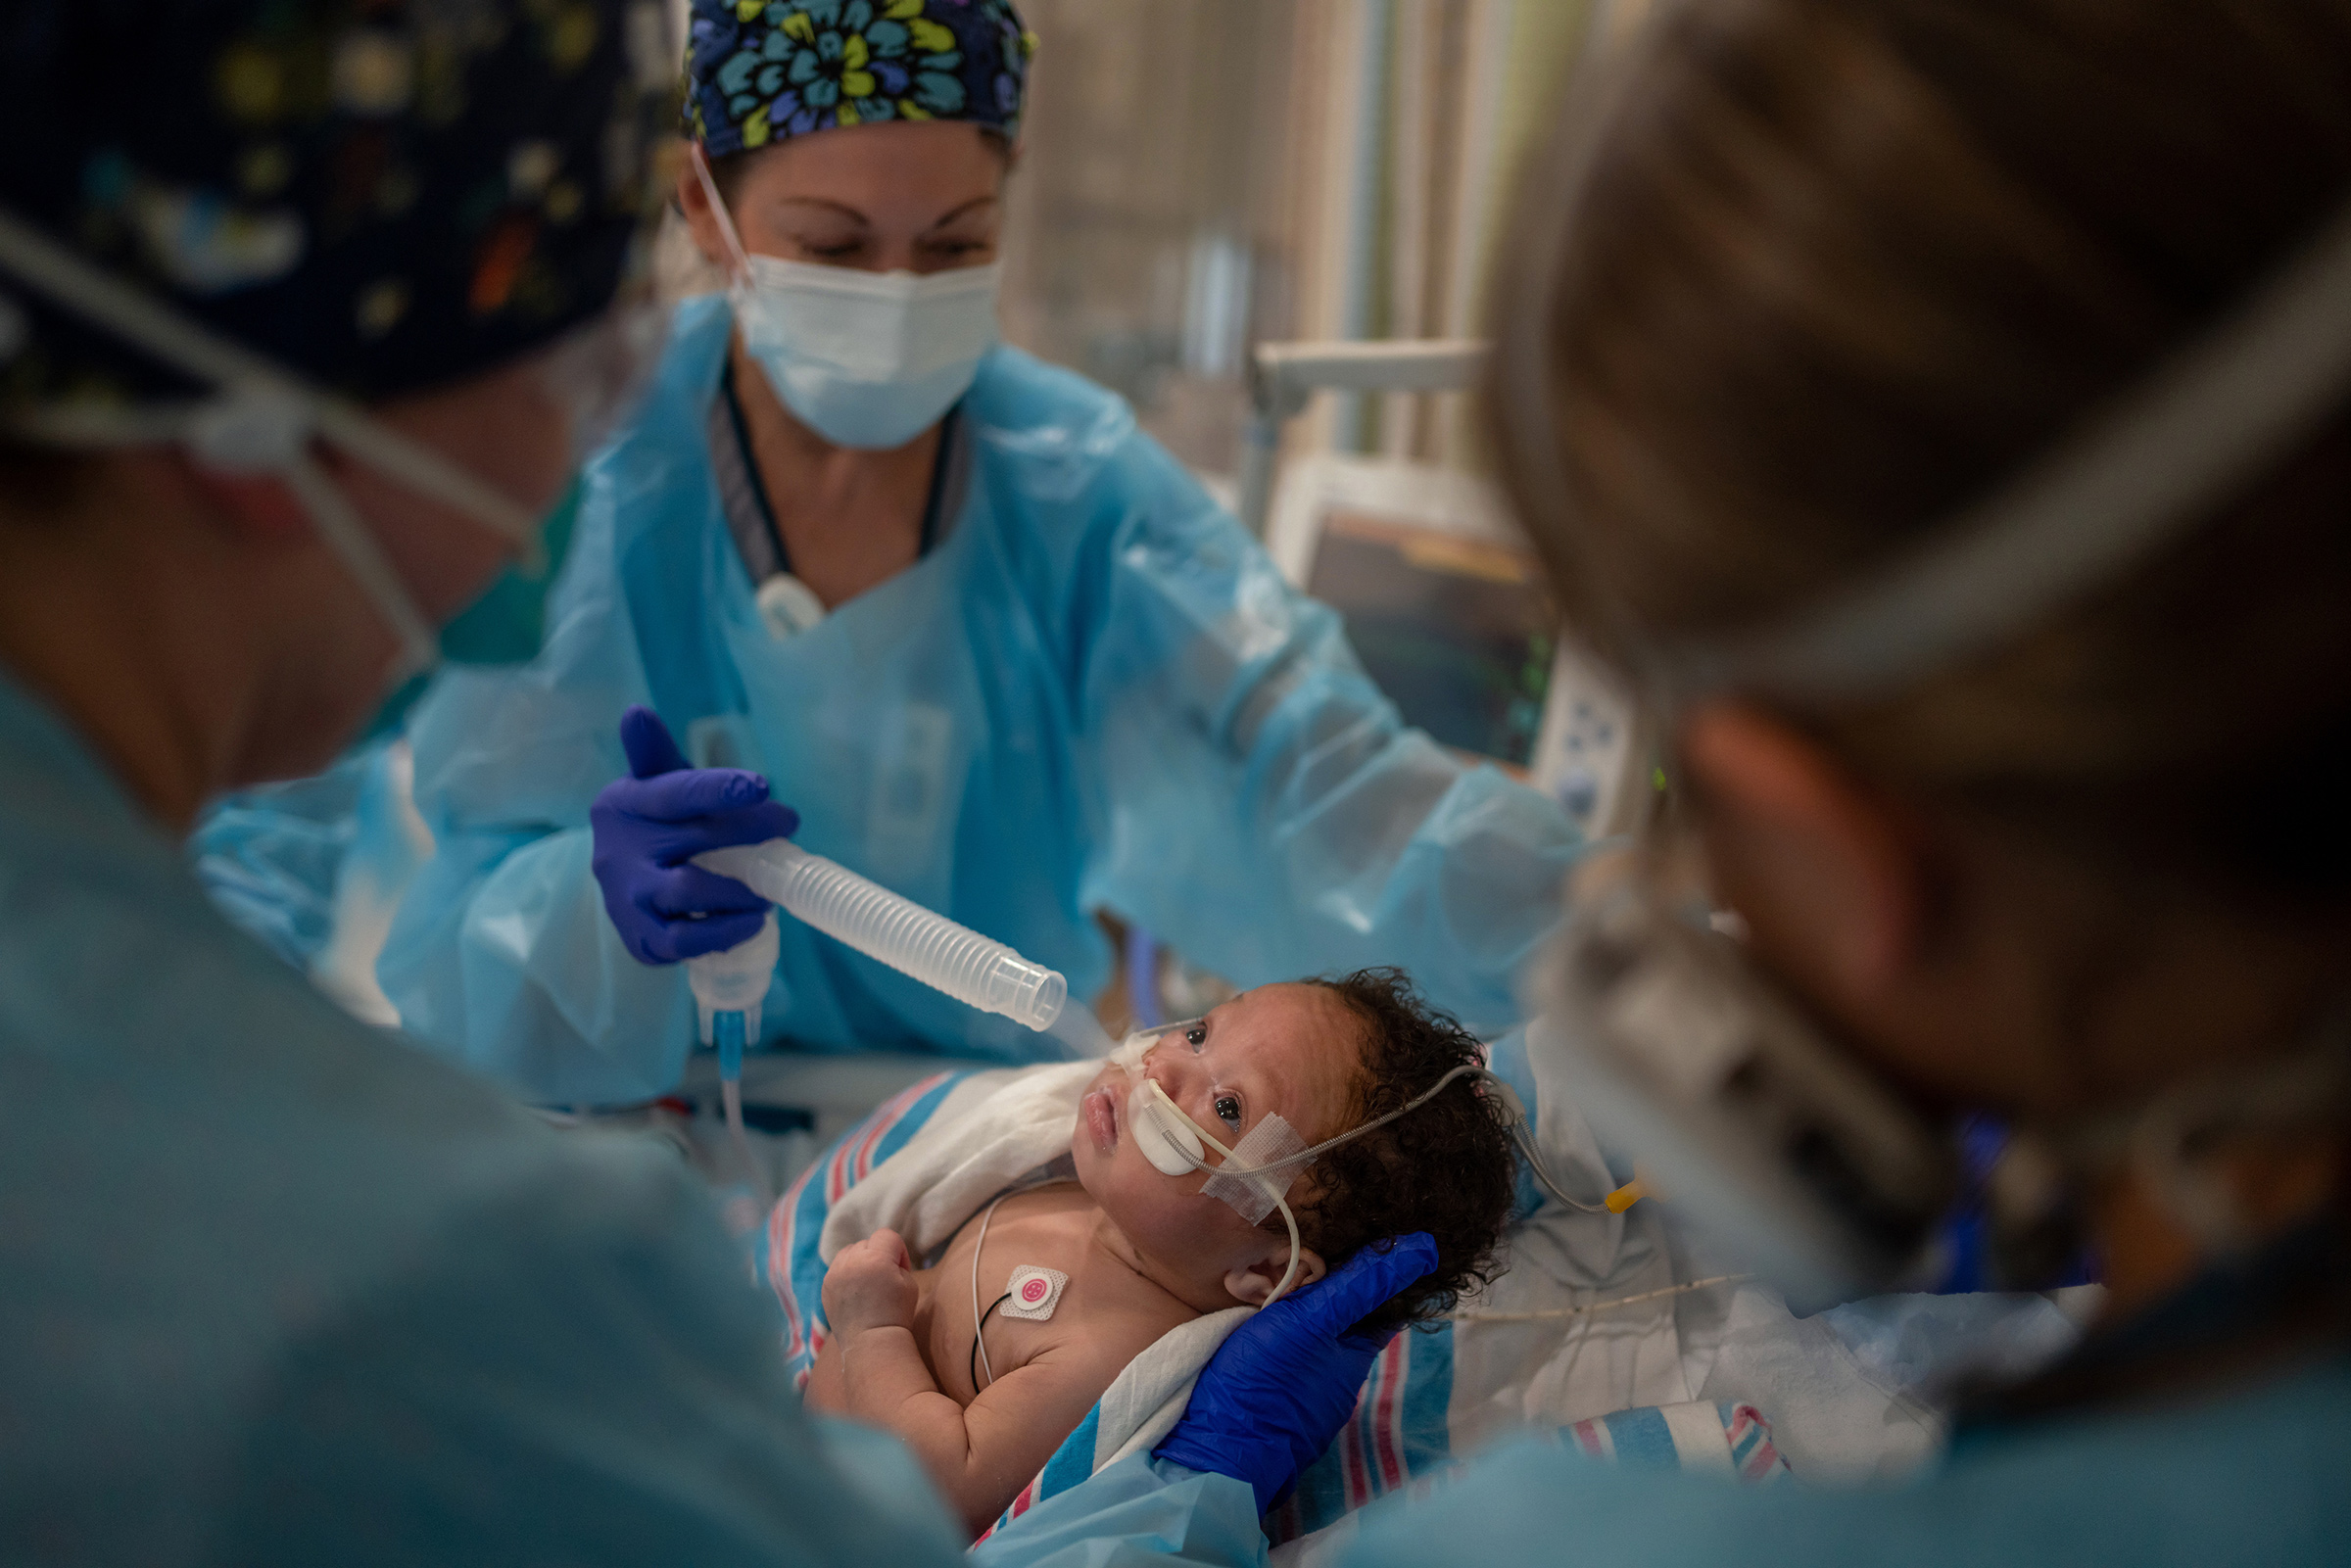 Respiratory therapist Diane Gelpi administers oxygen to Carvase Perrilloux after he was <a href="https://time.com/6092446/pediatric-covid-19-surge/">taken off a ventilator</a> at Children’s Hospital New Orleans on Aug. 20. The two-month-old, who arrived about a week earlier with respiratory syncytial virus and COVID-19, was finally ready to breathe without the ventilator keeping his tiny body alive. "You did it!" nurses in PPE cooed as they removed the tube from his airway and he took his first solo gasp, bare toes kicking. (Kathleen Flynn for TIME)